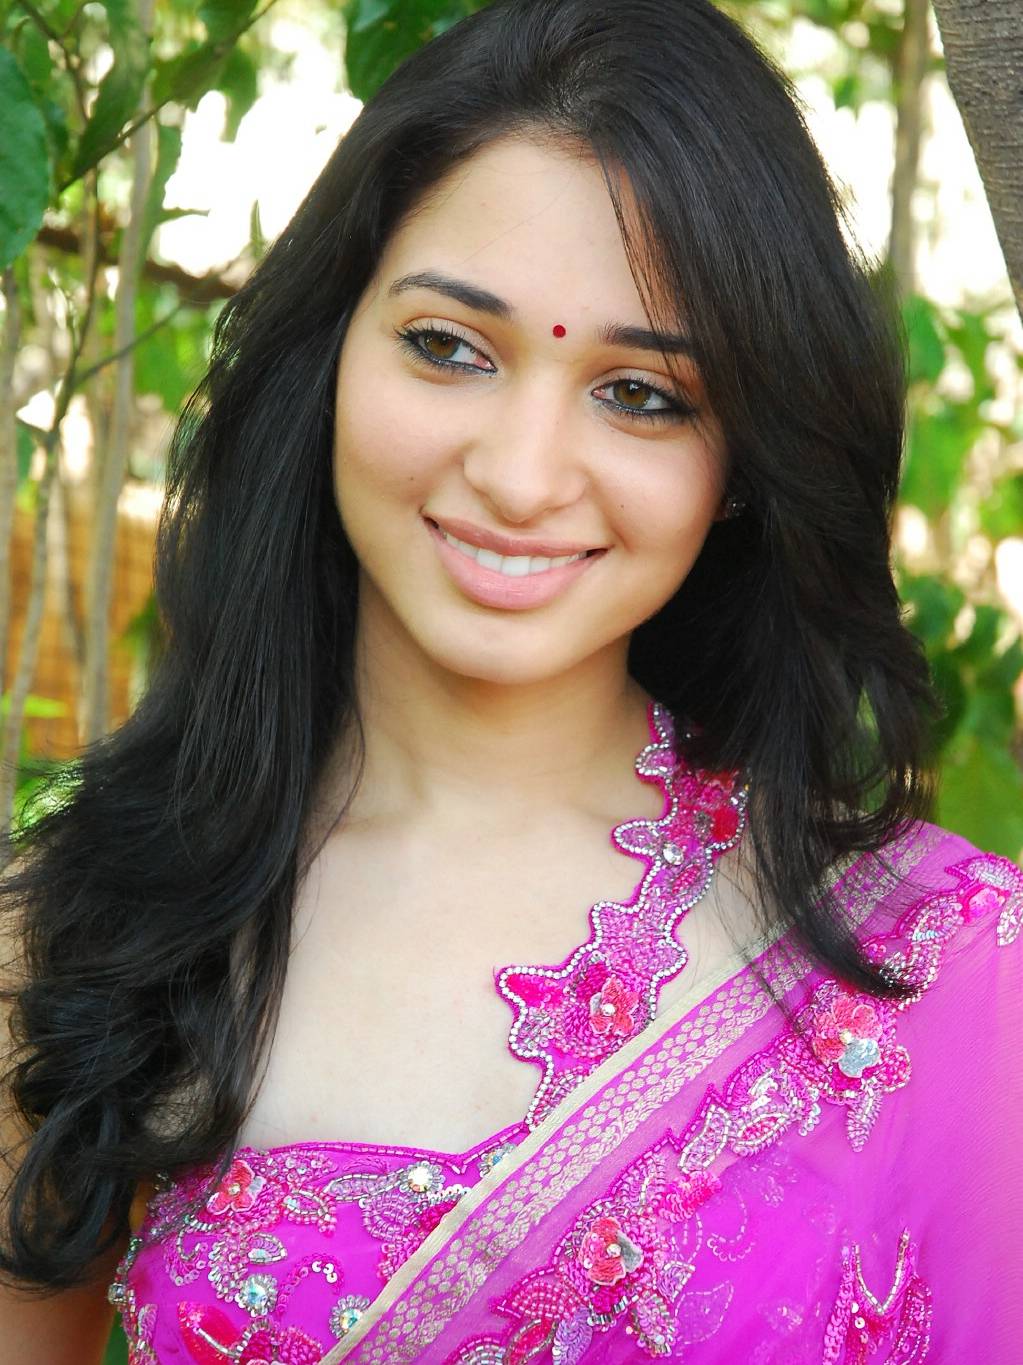 Download this Cute Actress Hot Photos picture